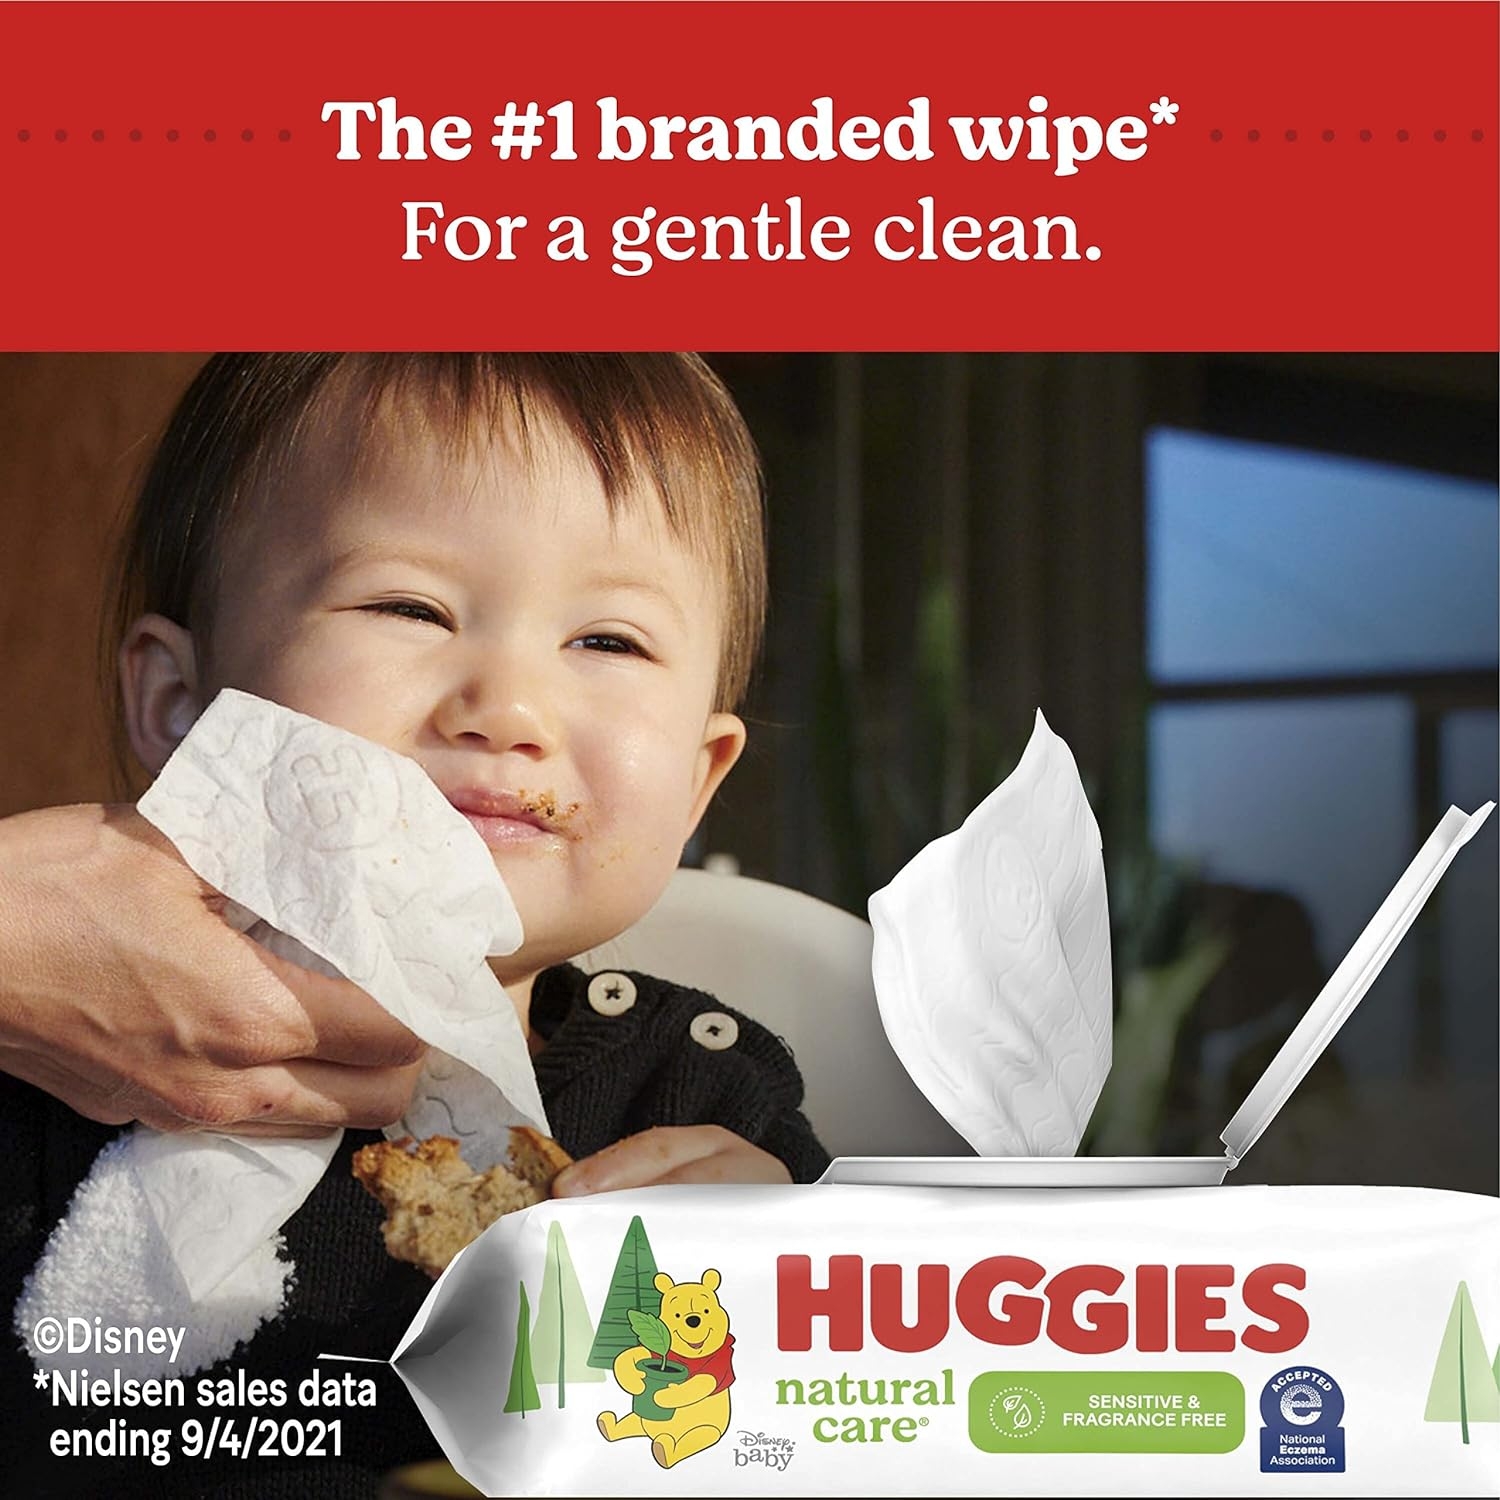 Baby Wipes, Huggies Natural Care Sensitive Baby Diaper Wipes, Unscented, Hypoallergenic, 10 Flip-Top Packs (560 Wipes Total)